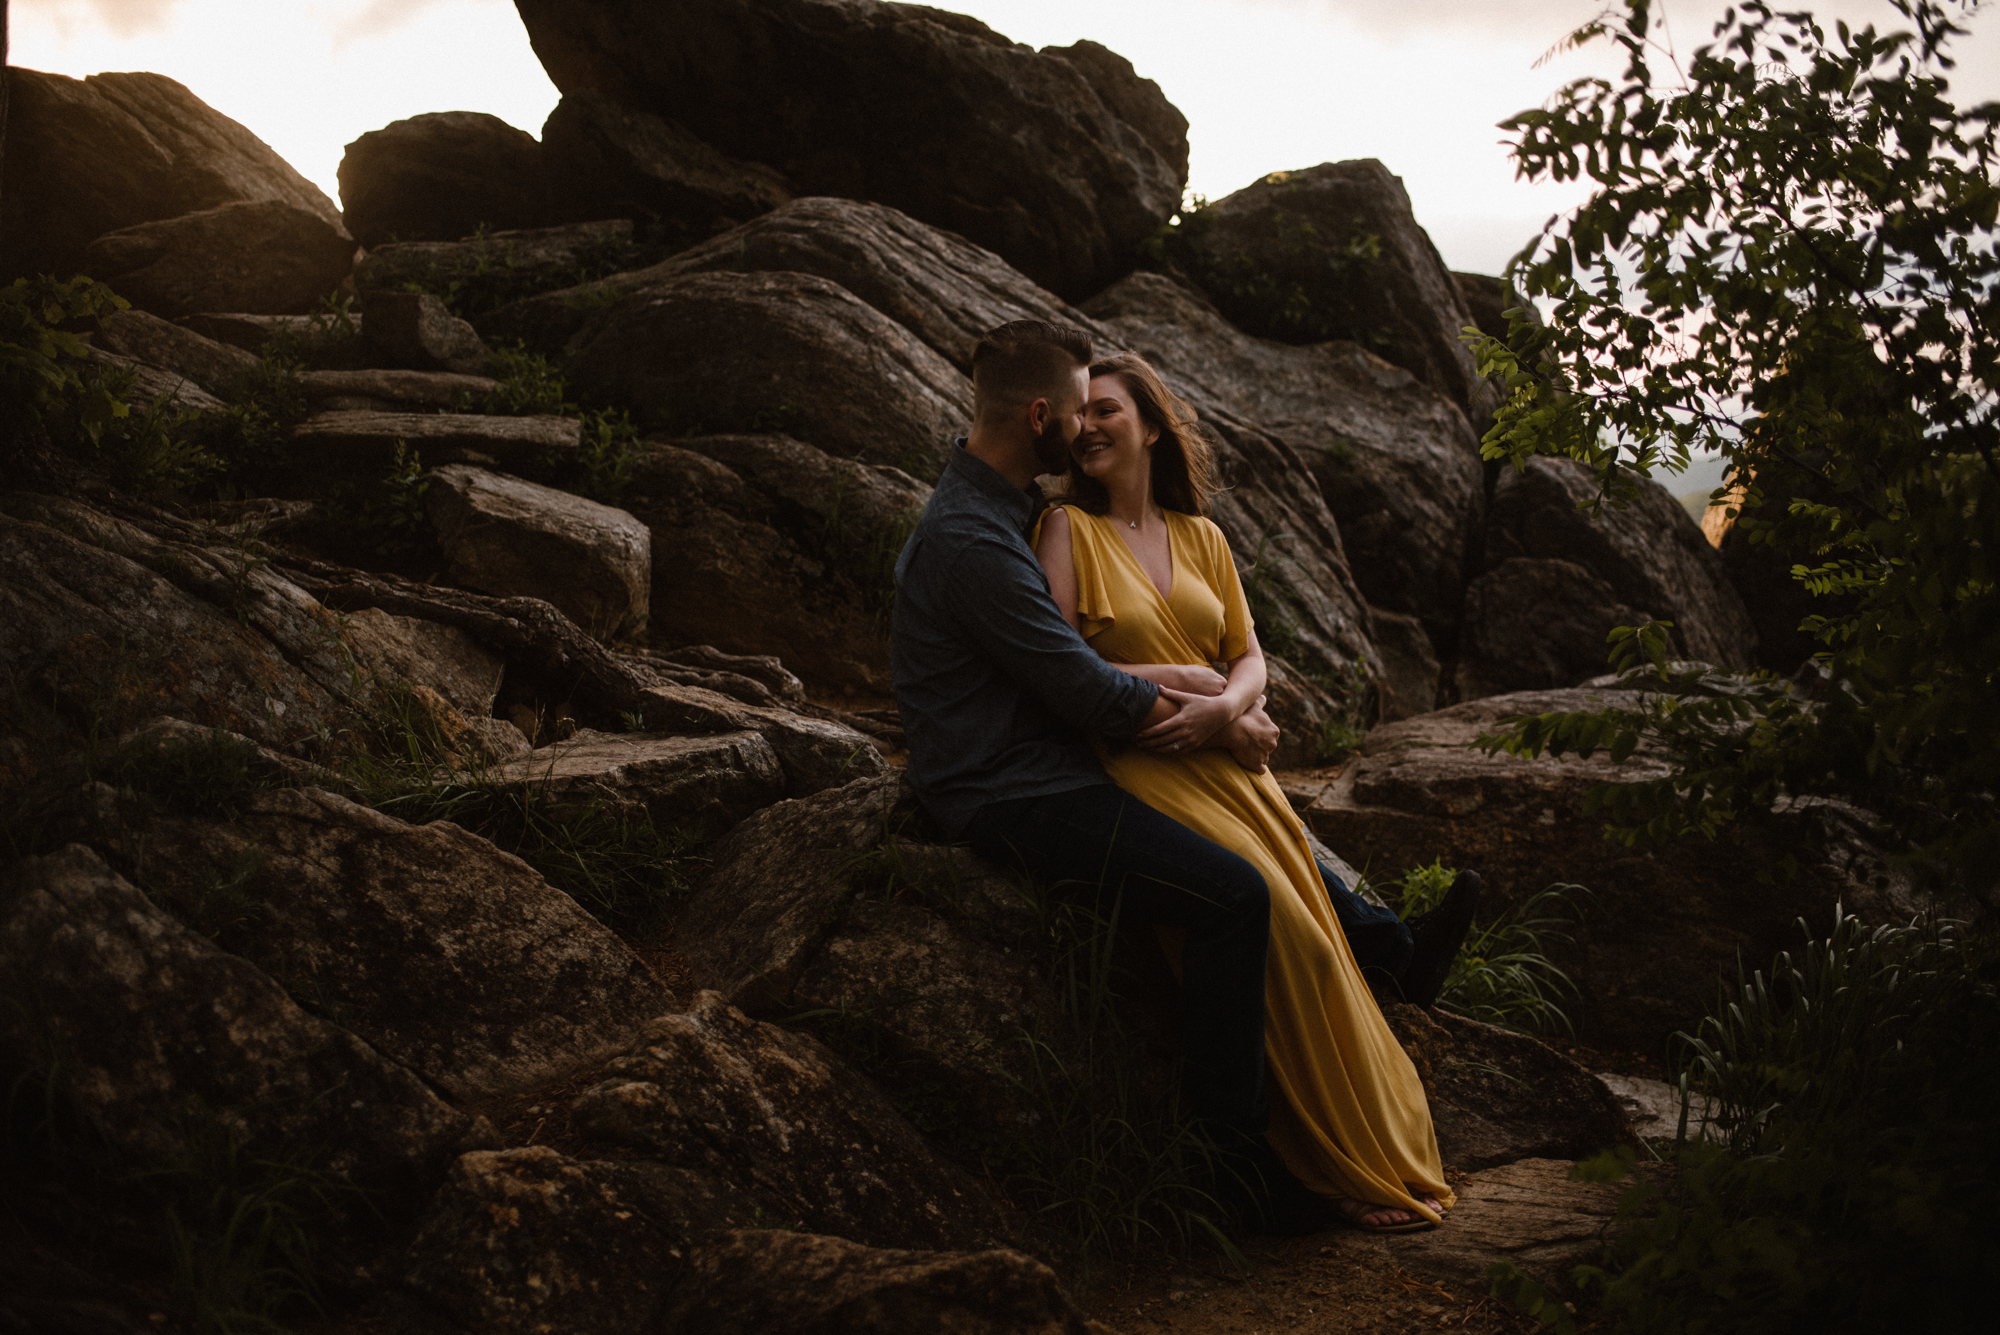 Camryn and Larry Sunrise Engagement Session in Shenandoah National Park - Things to Do in Luray Virginia - Adventurous Couple Photo Shoot White Sails Creative_15.jpg